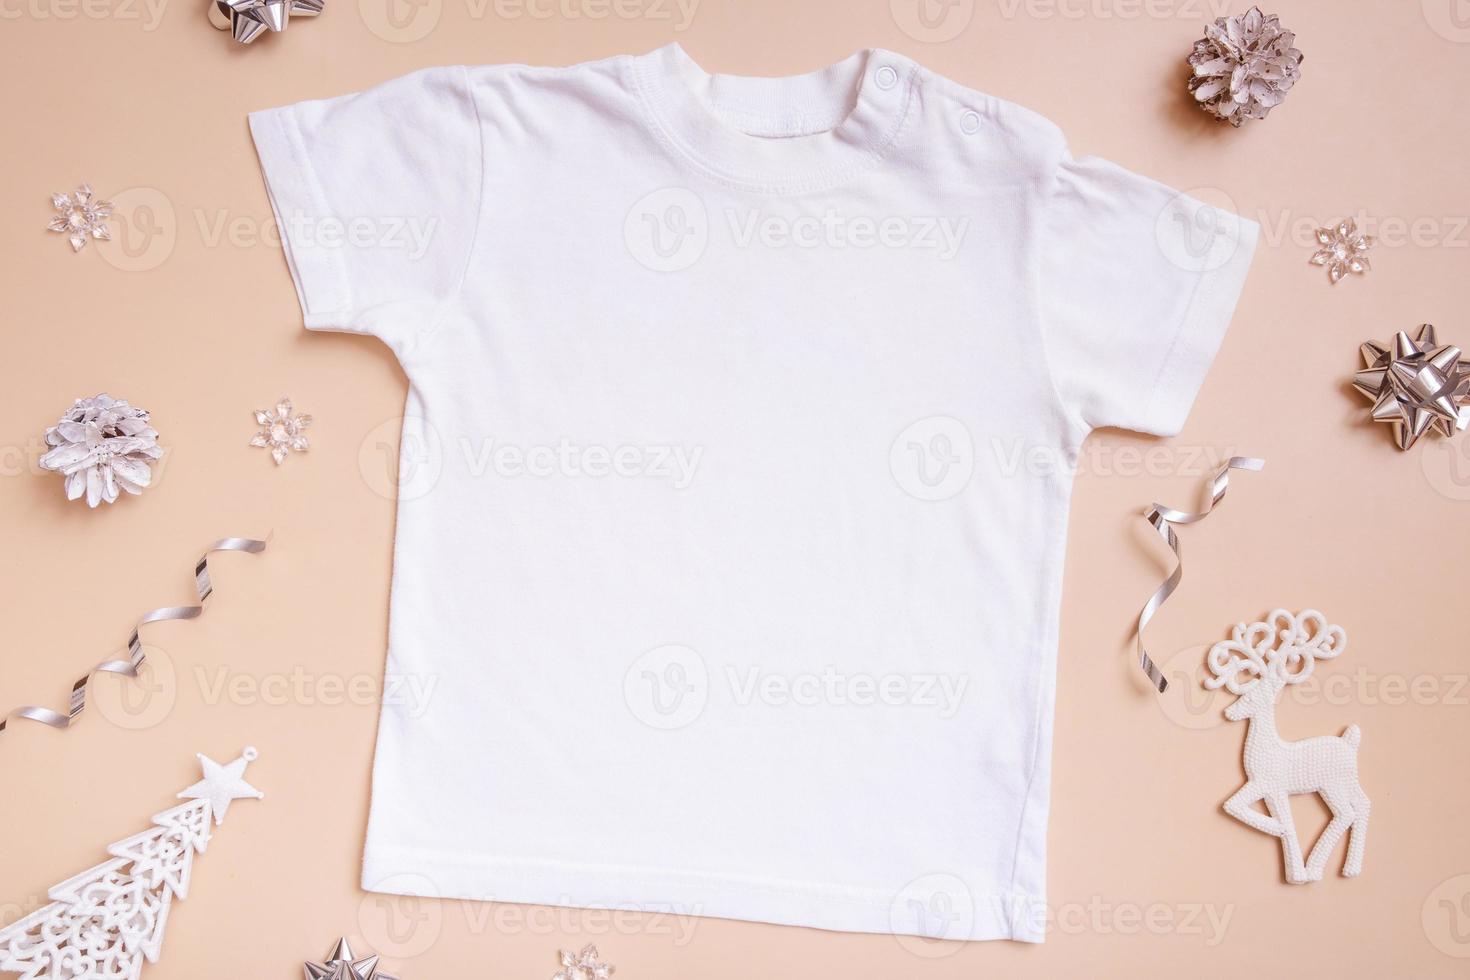 Baby t-shirt mockup for logo, text or design on beige background with winter decotations top view. photo